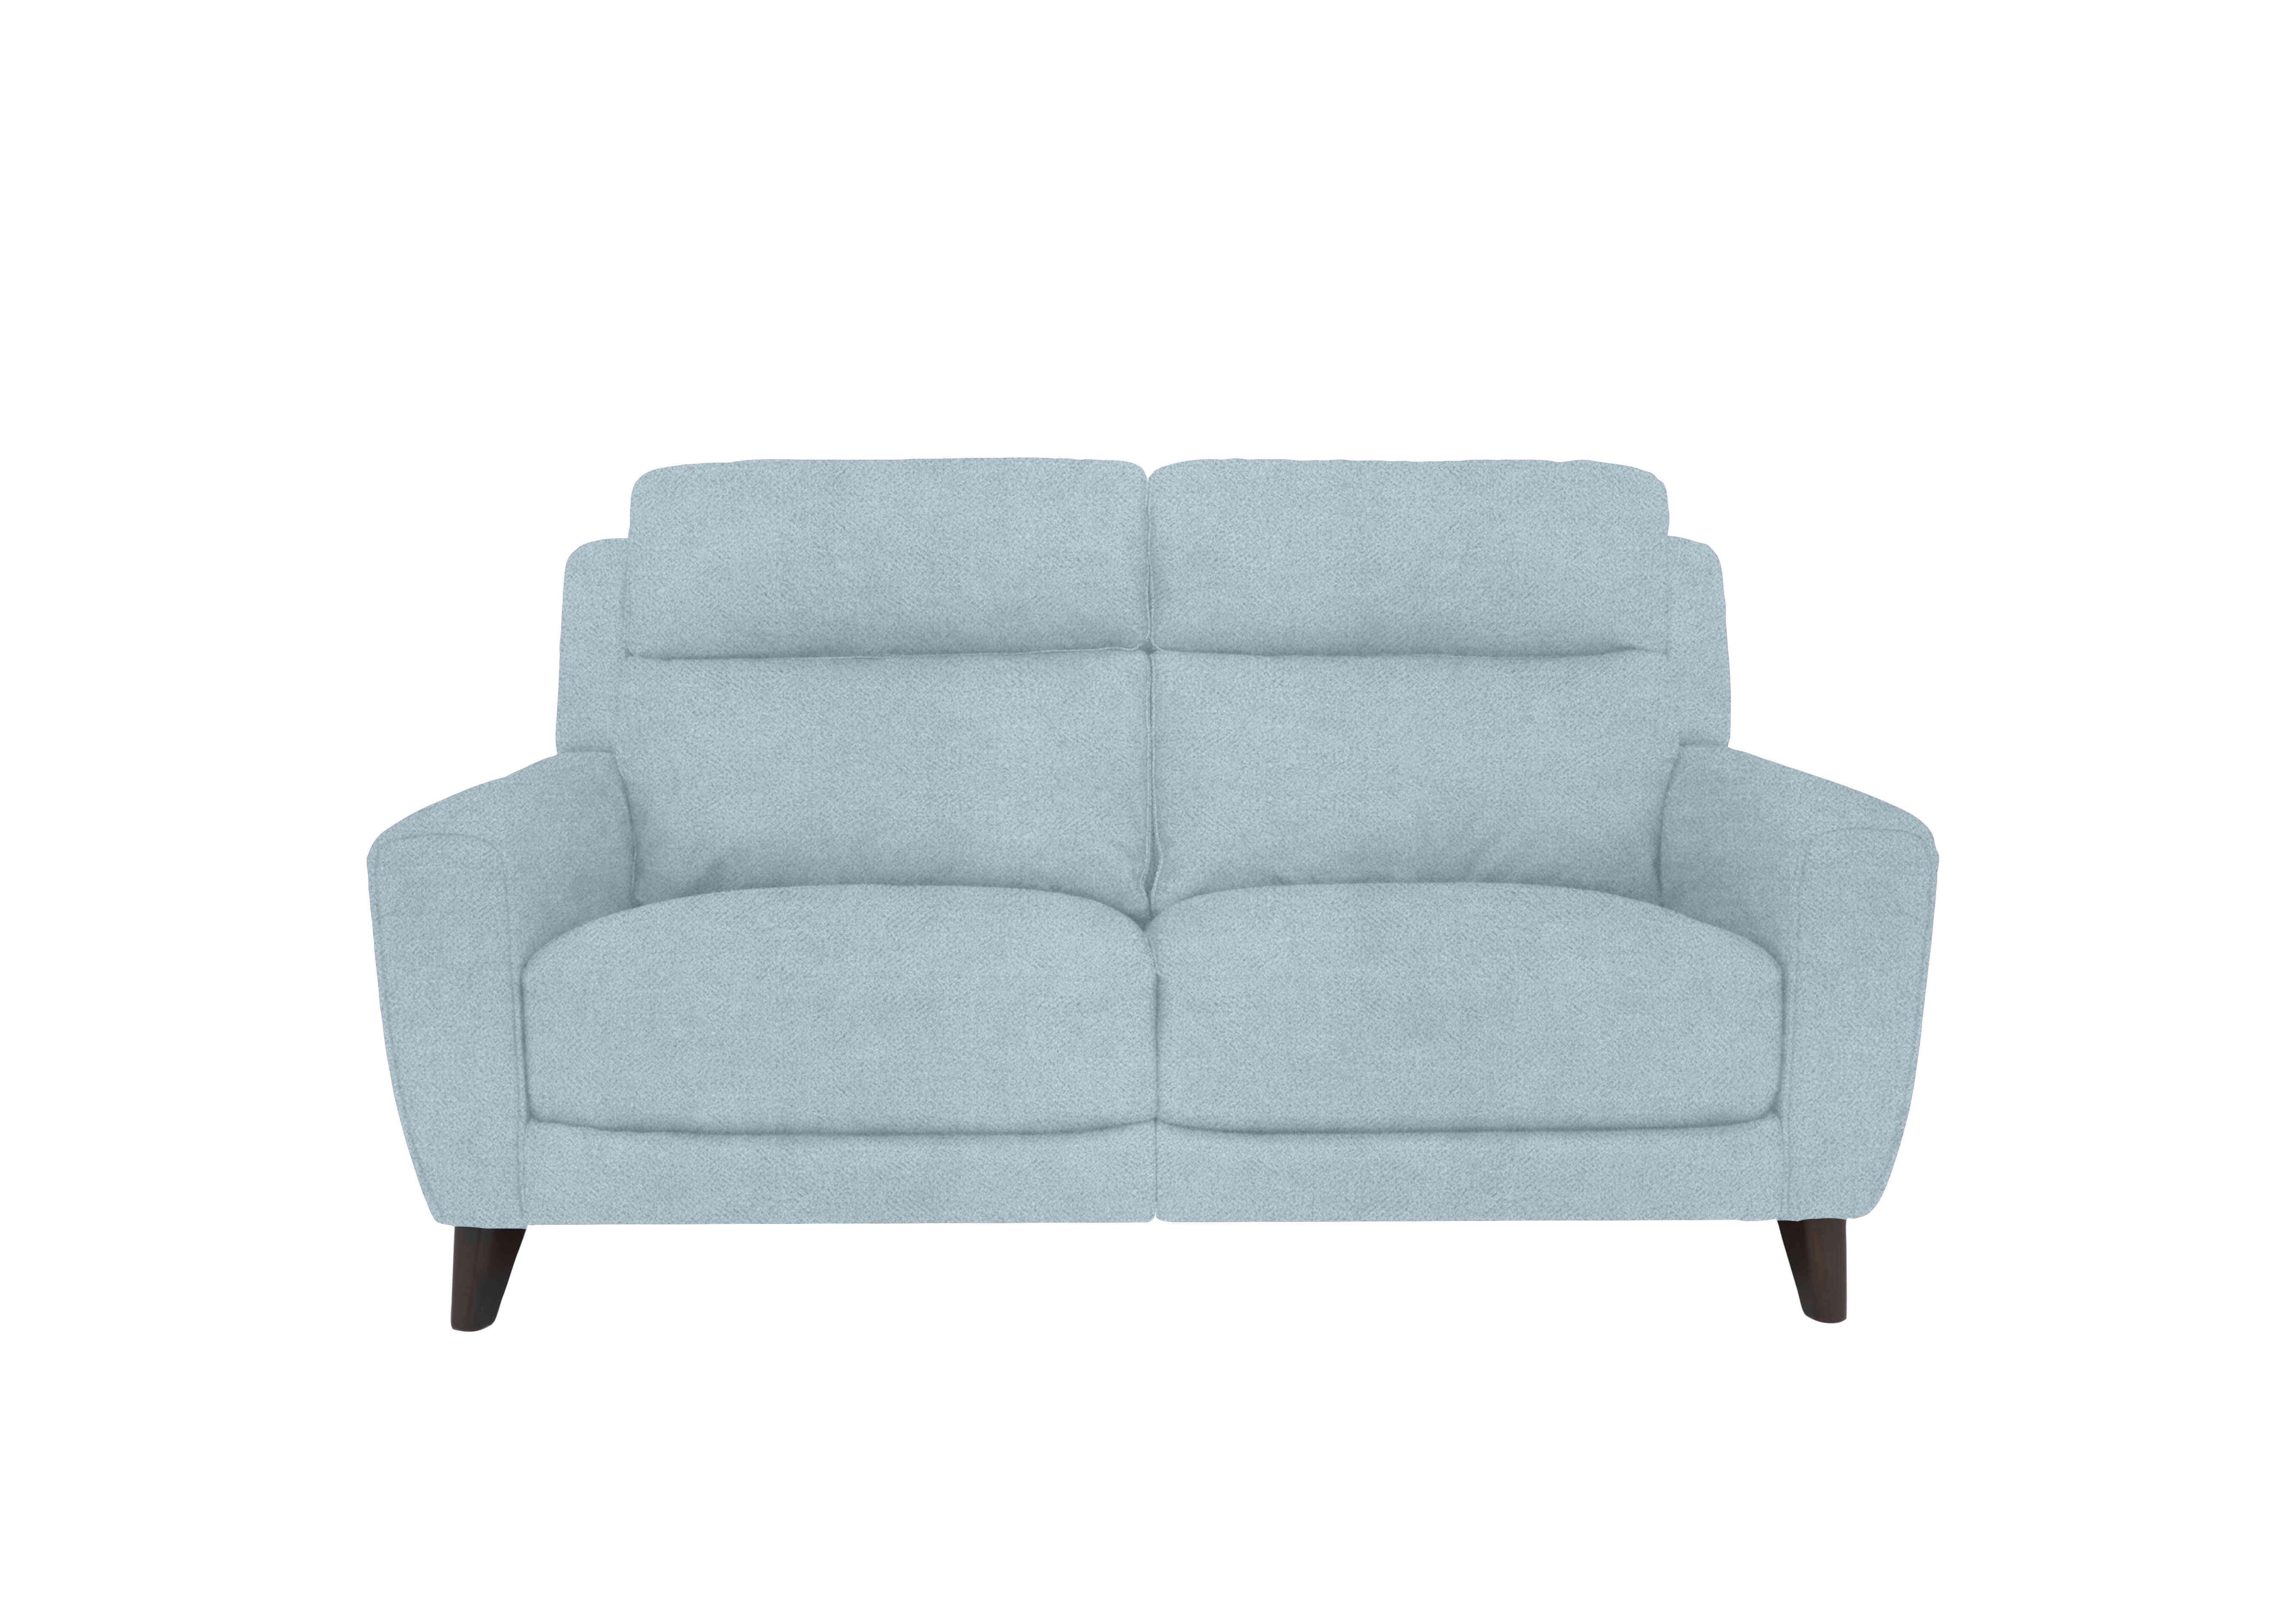 Zen 2 Seater Fabric Power Recliner Sofa with Power Headrests and Power Lumbar in Fab-Meo-R17 Baby Blue on Furniture Village